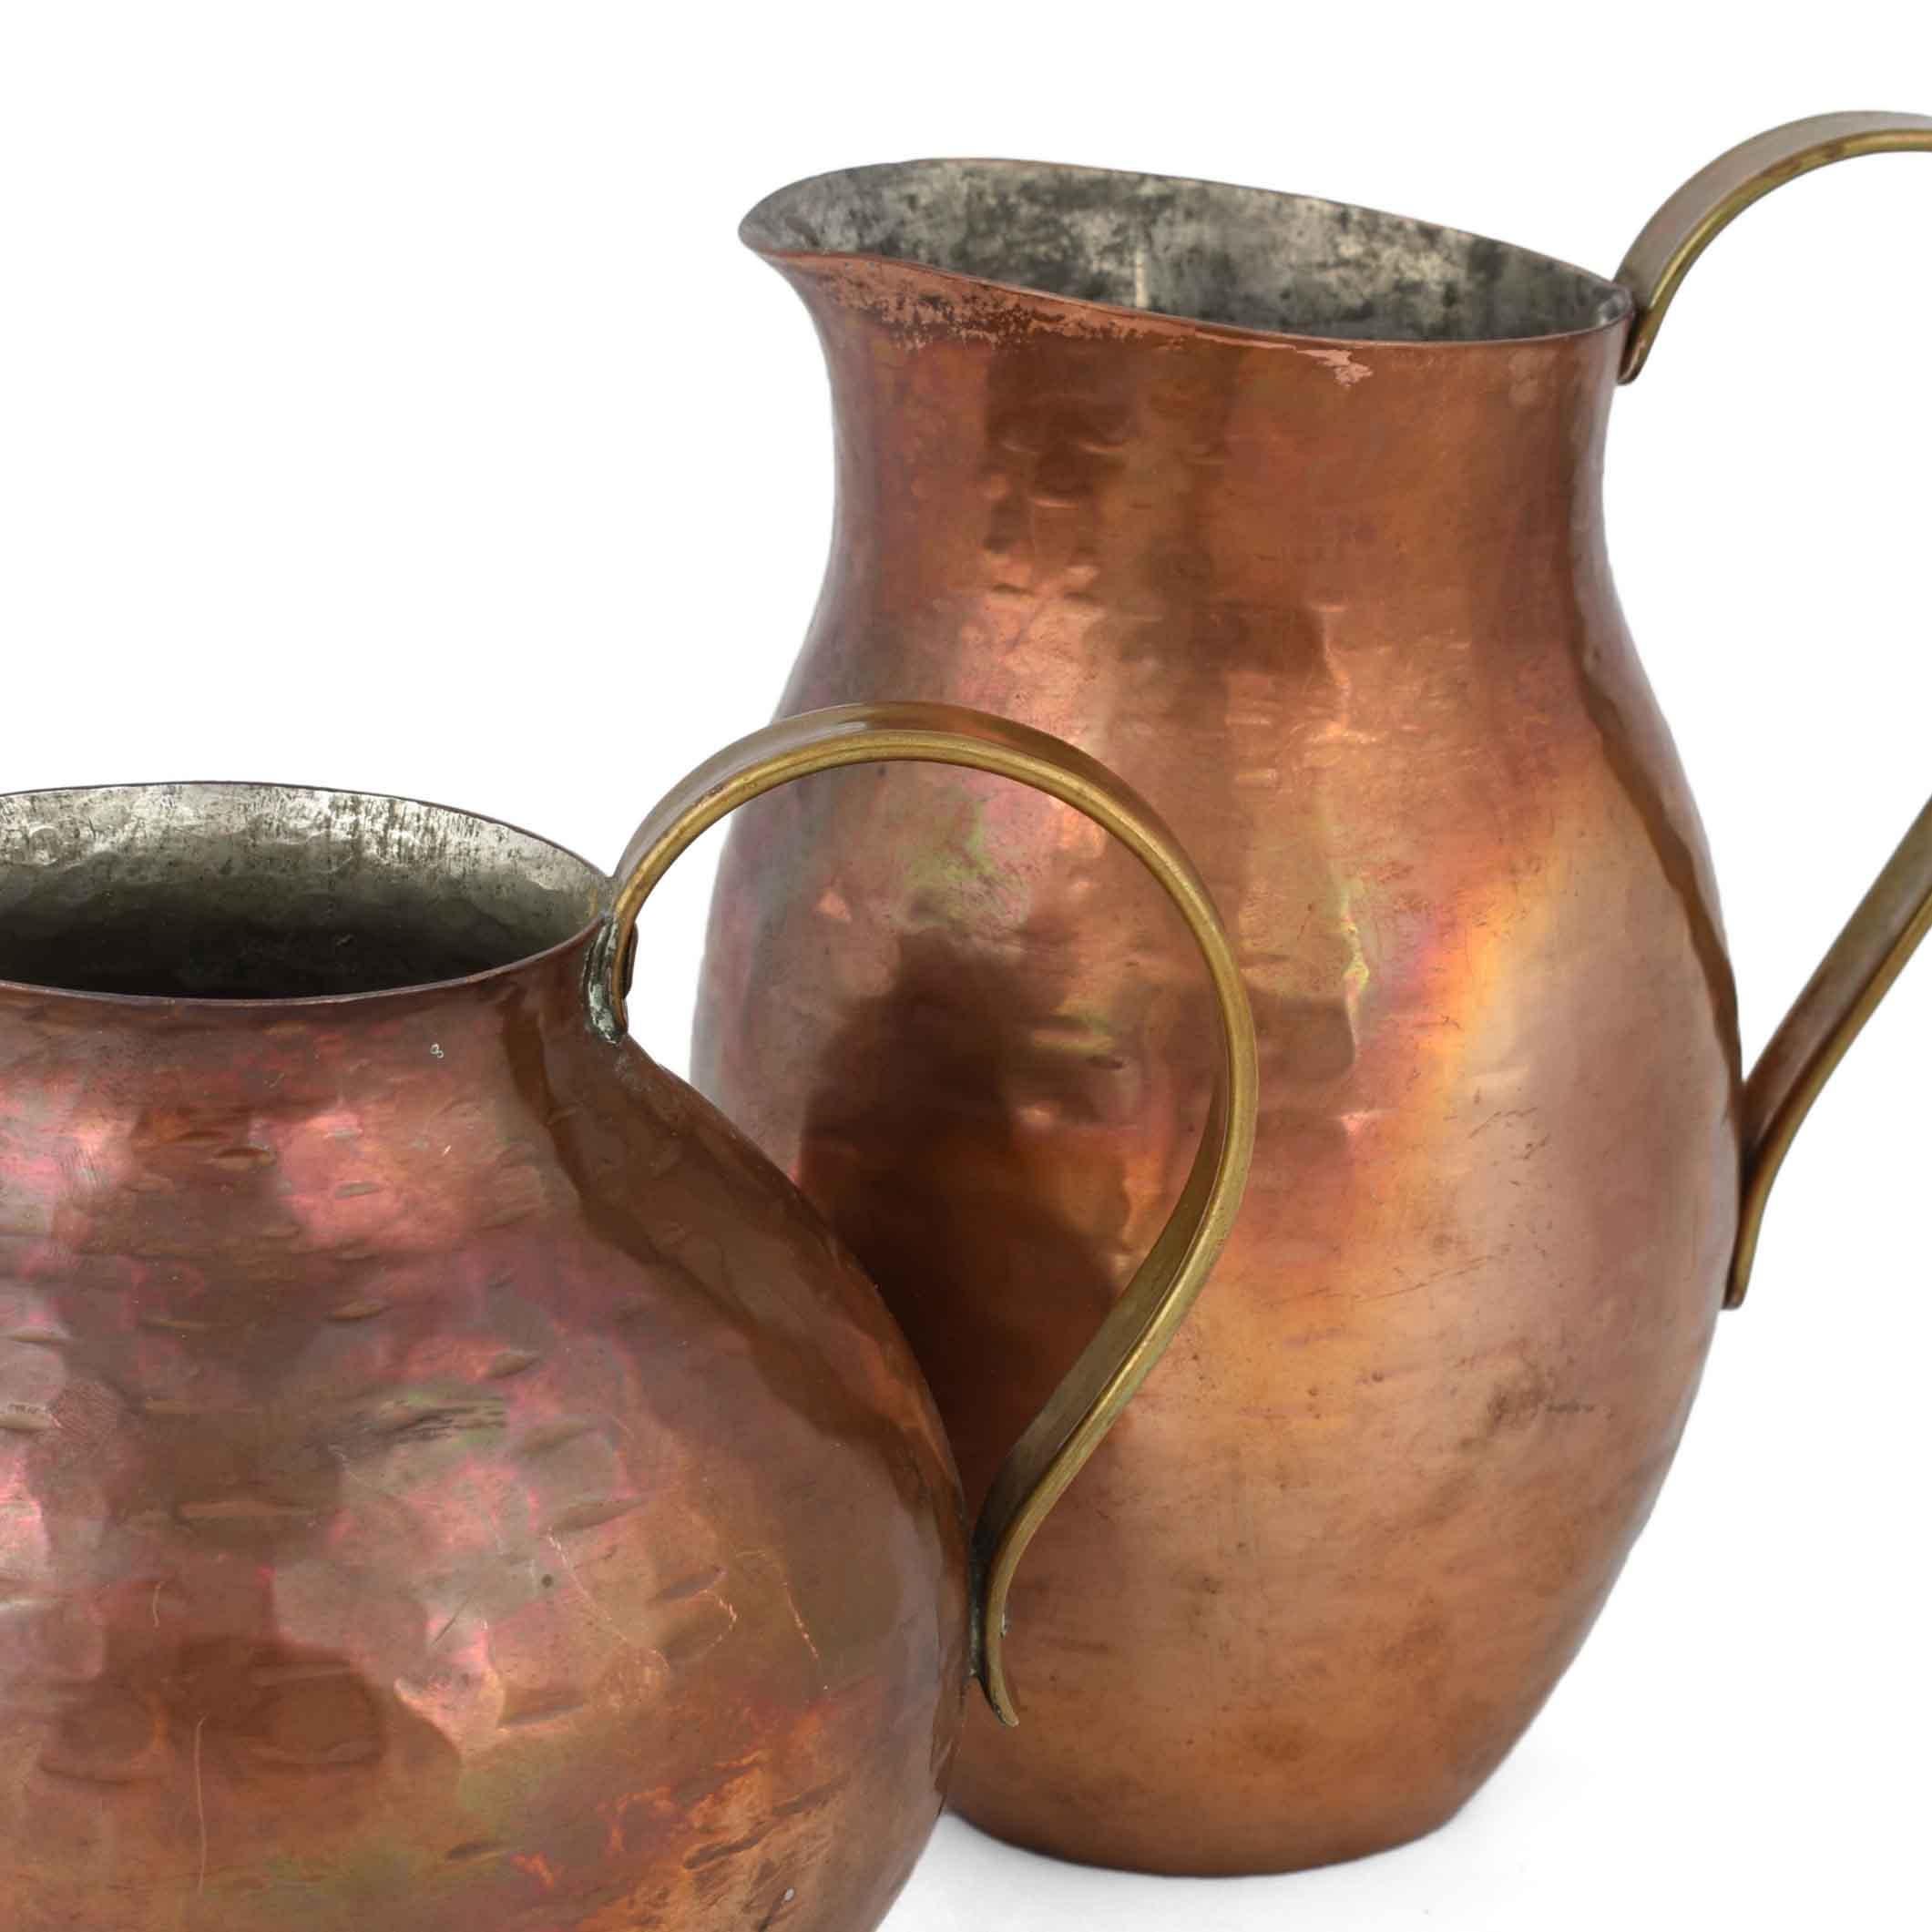 Two copper pitchers is an original decorative pair of objects realized in the second third of the 20th century.

Original copper, the set includes: a high copper pitcher (H. 16 cm) and a smaller copper pitcher (H. 12.5 cm).

Realized by Harald